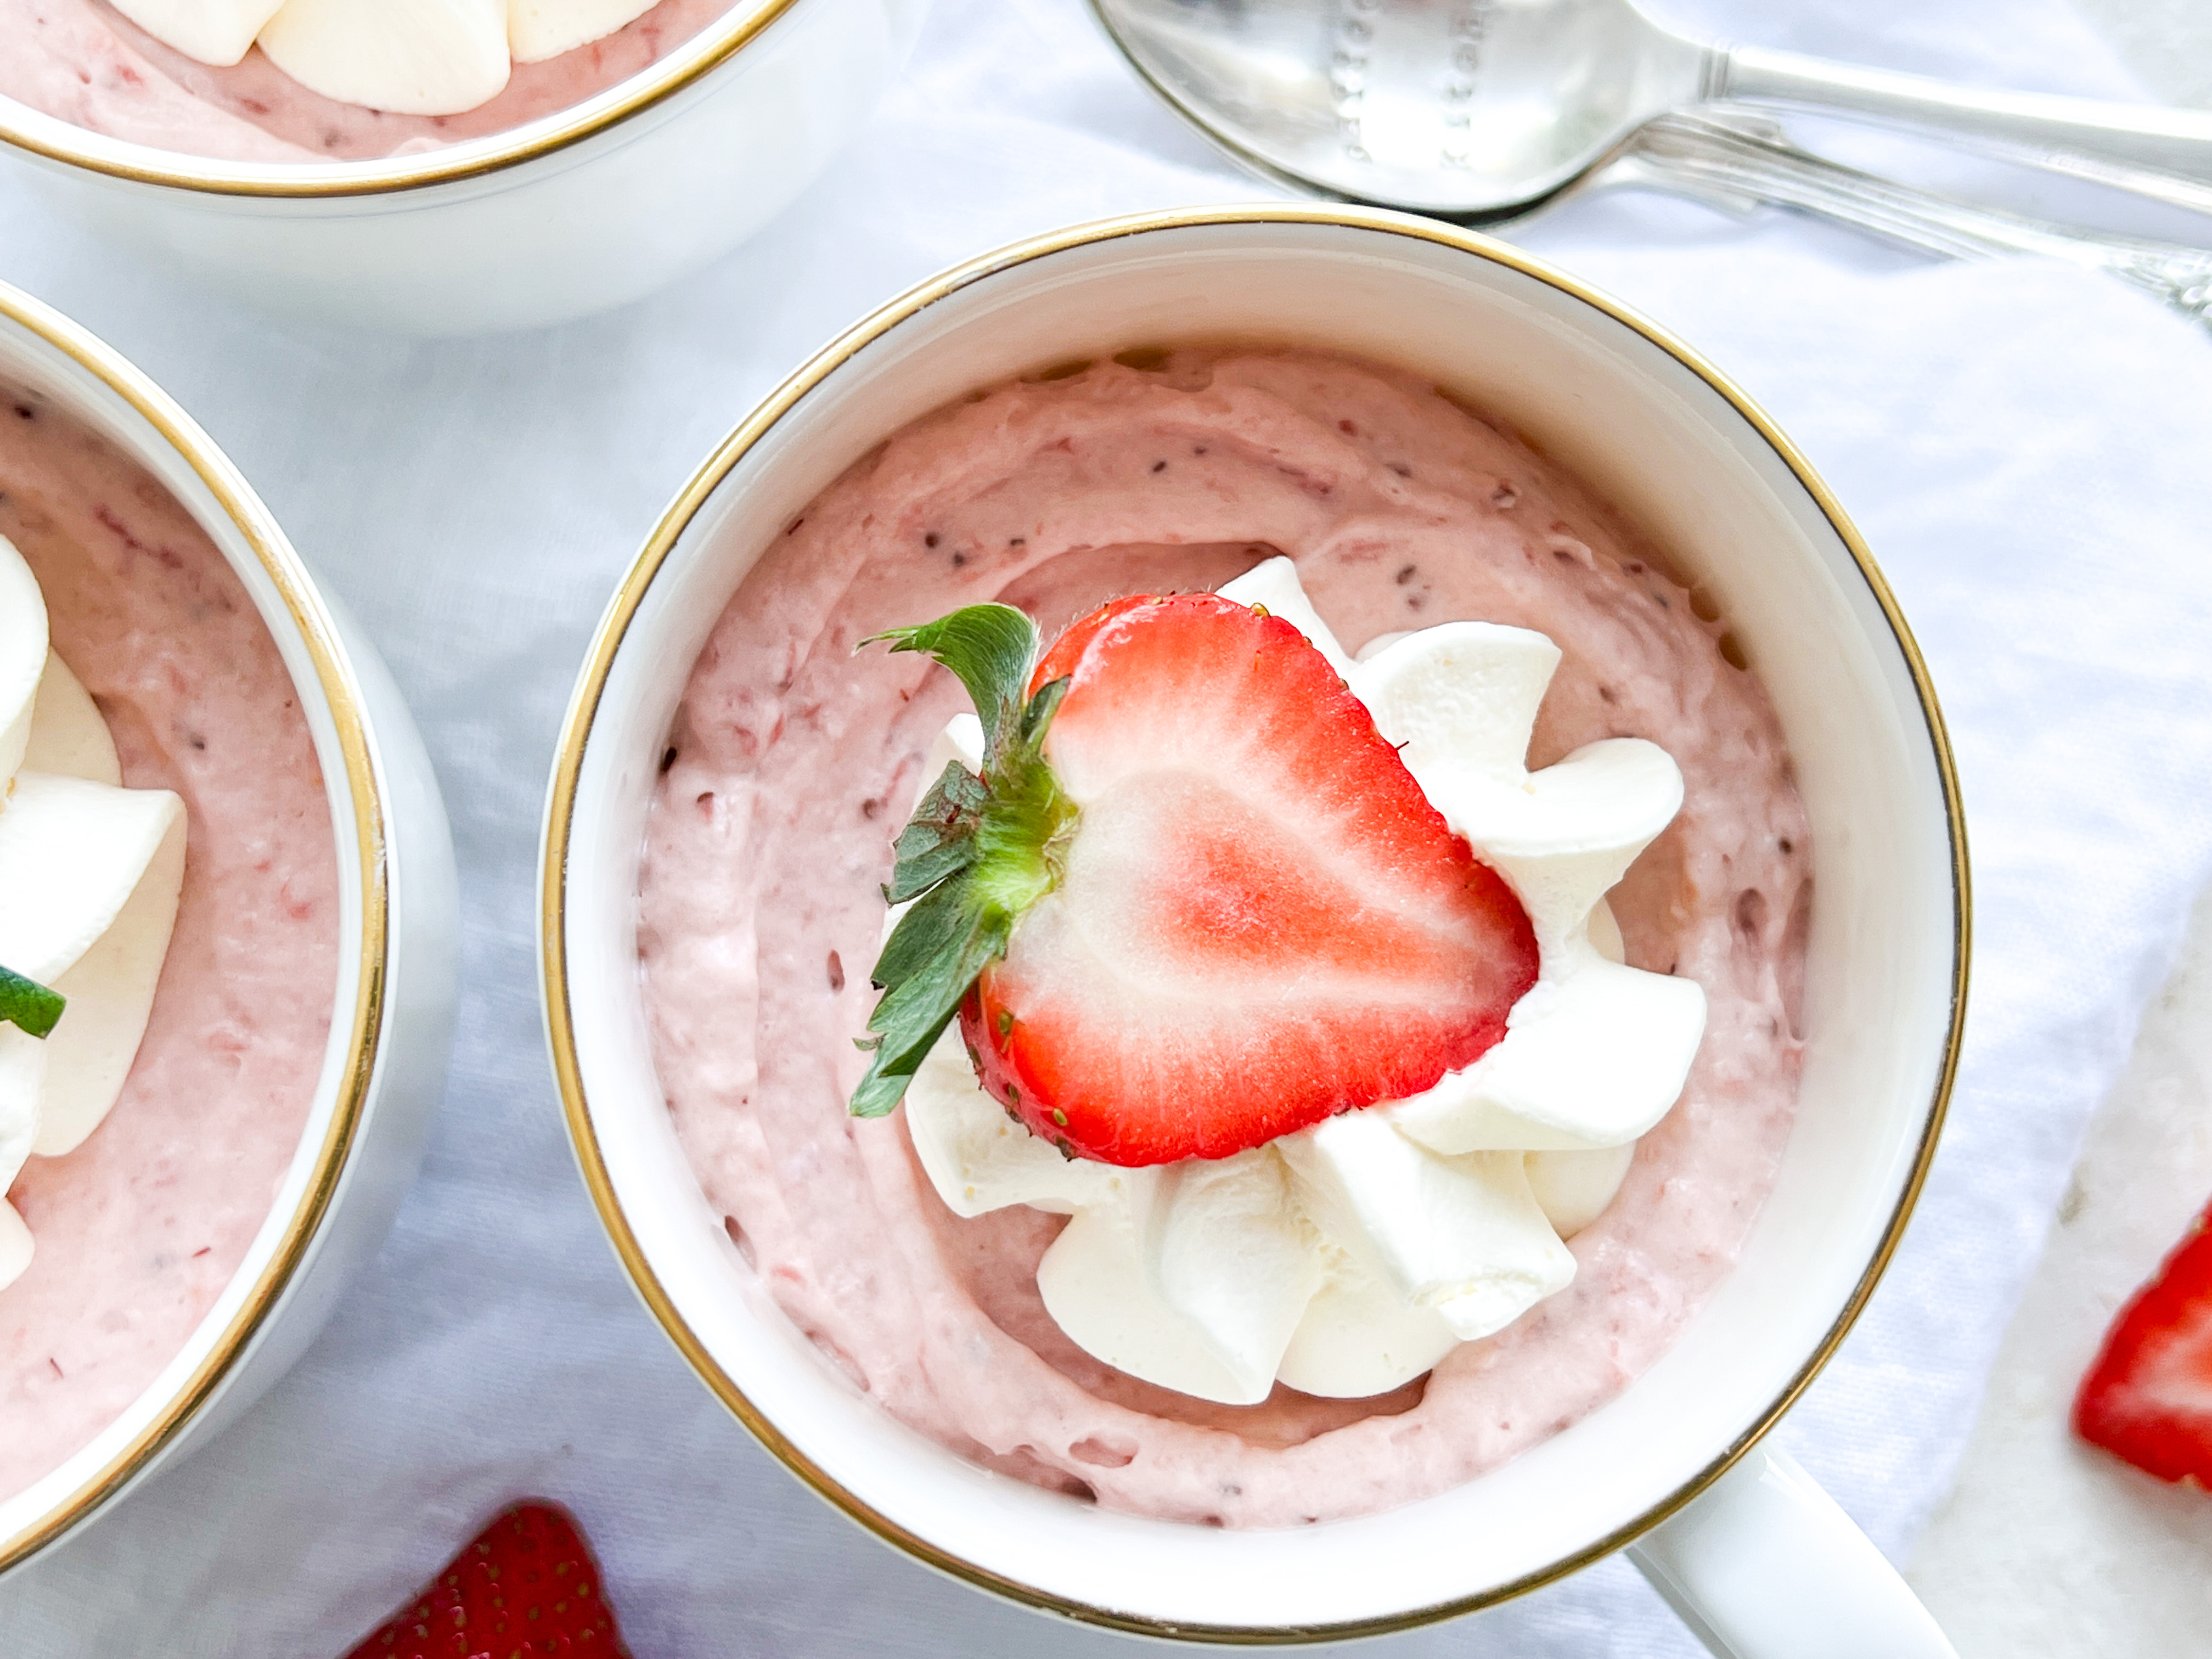 Photograph of Strawberry Mousse